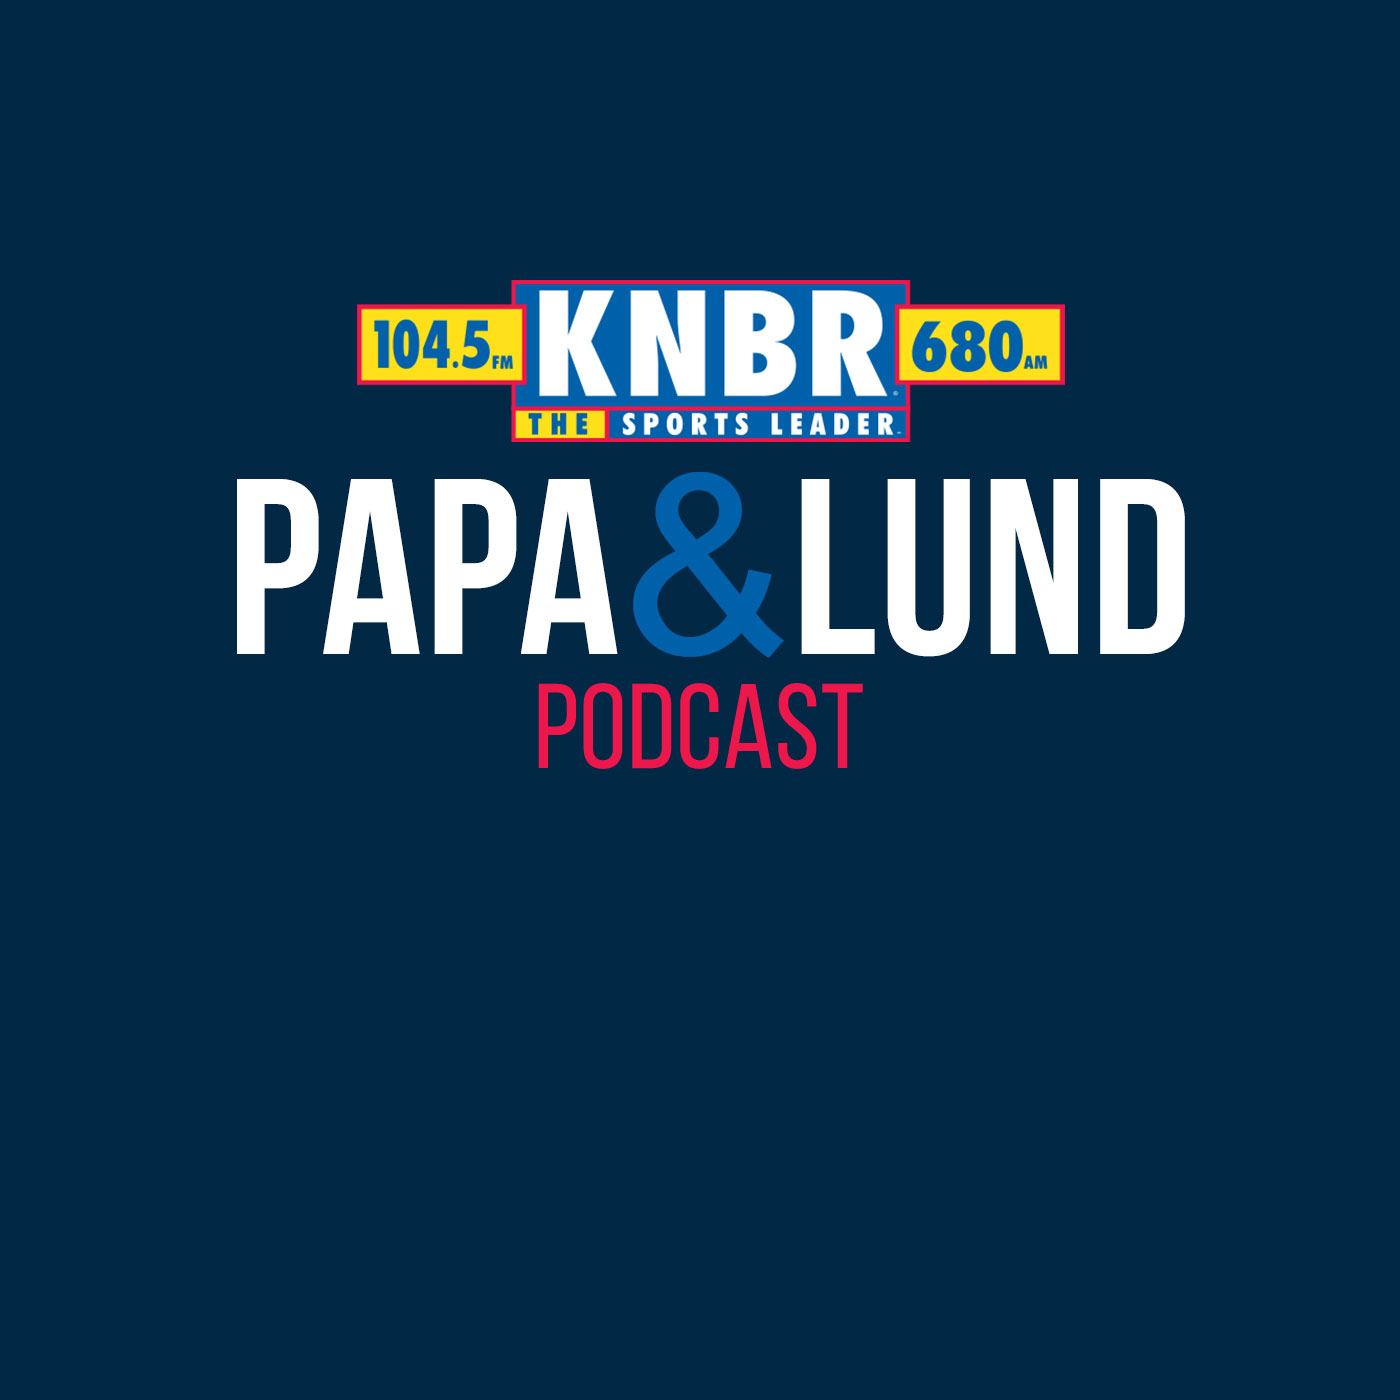 10-22 Personal Development Coach for Steph Curry, Brandon Payne joins Papa & Lund